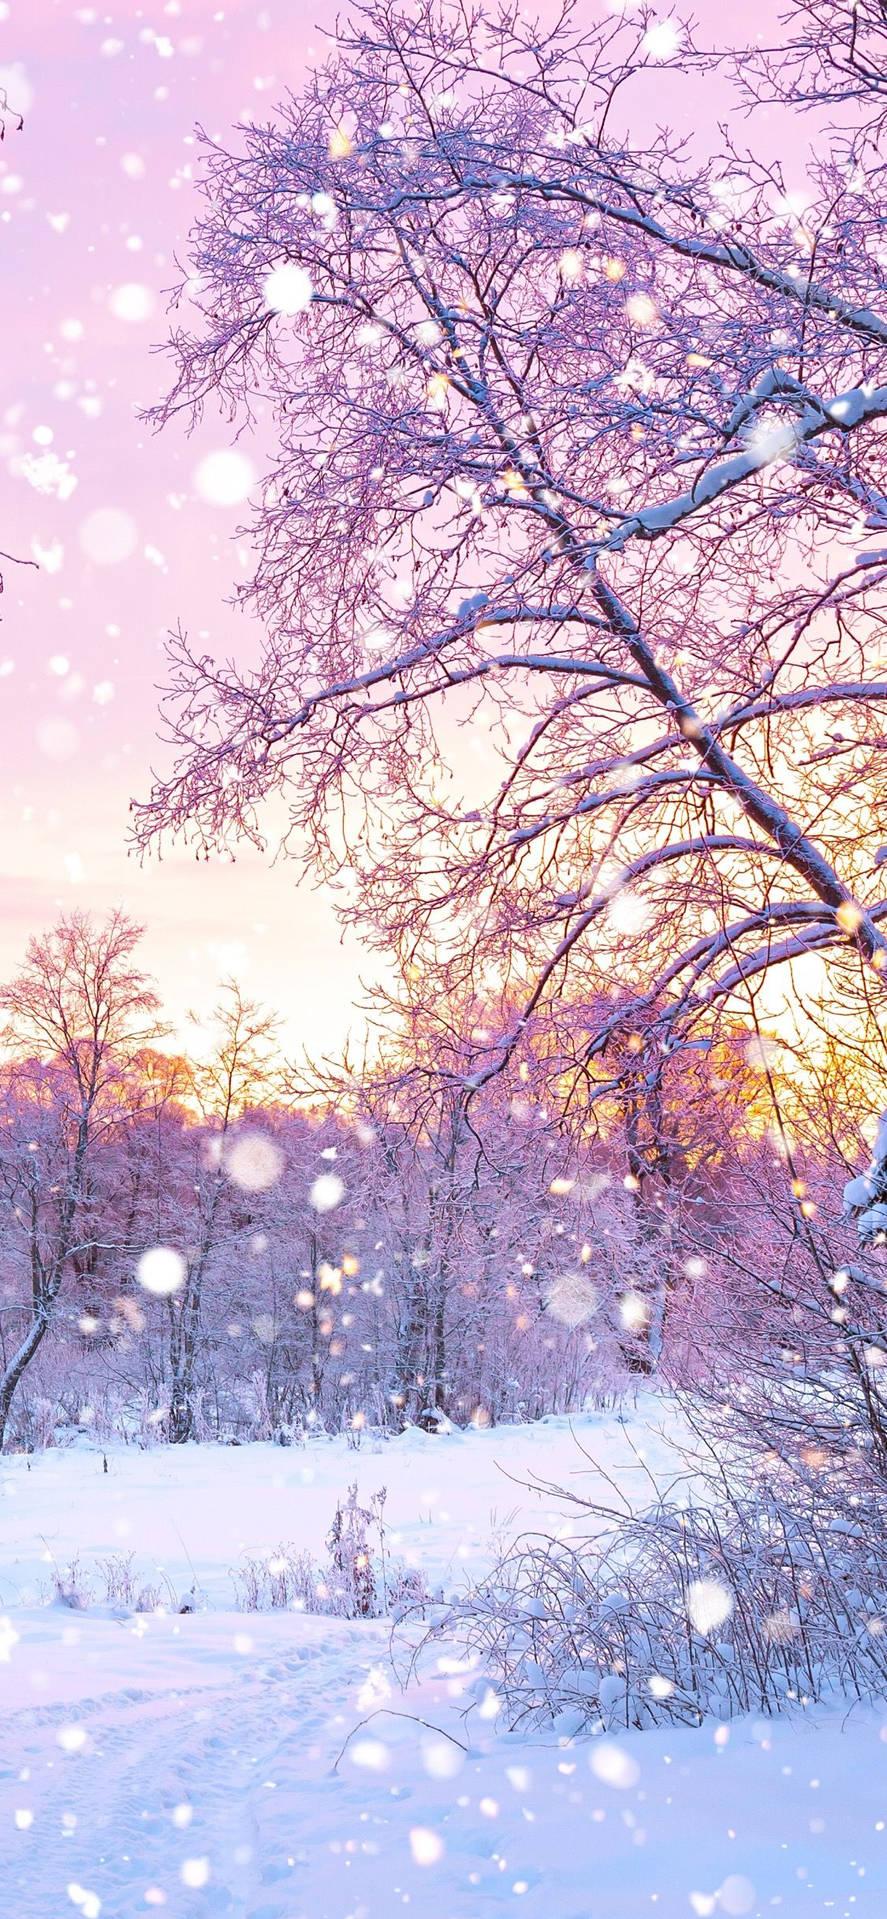  Cute Winter Iphone Wallpapers